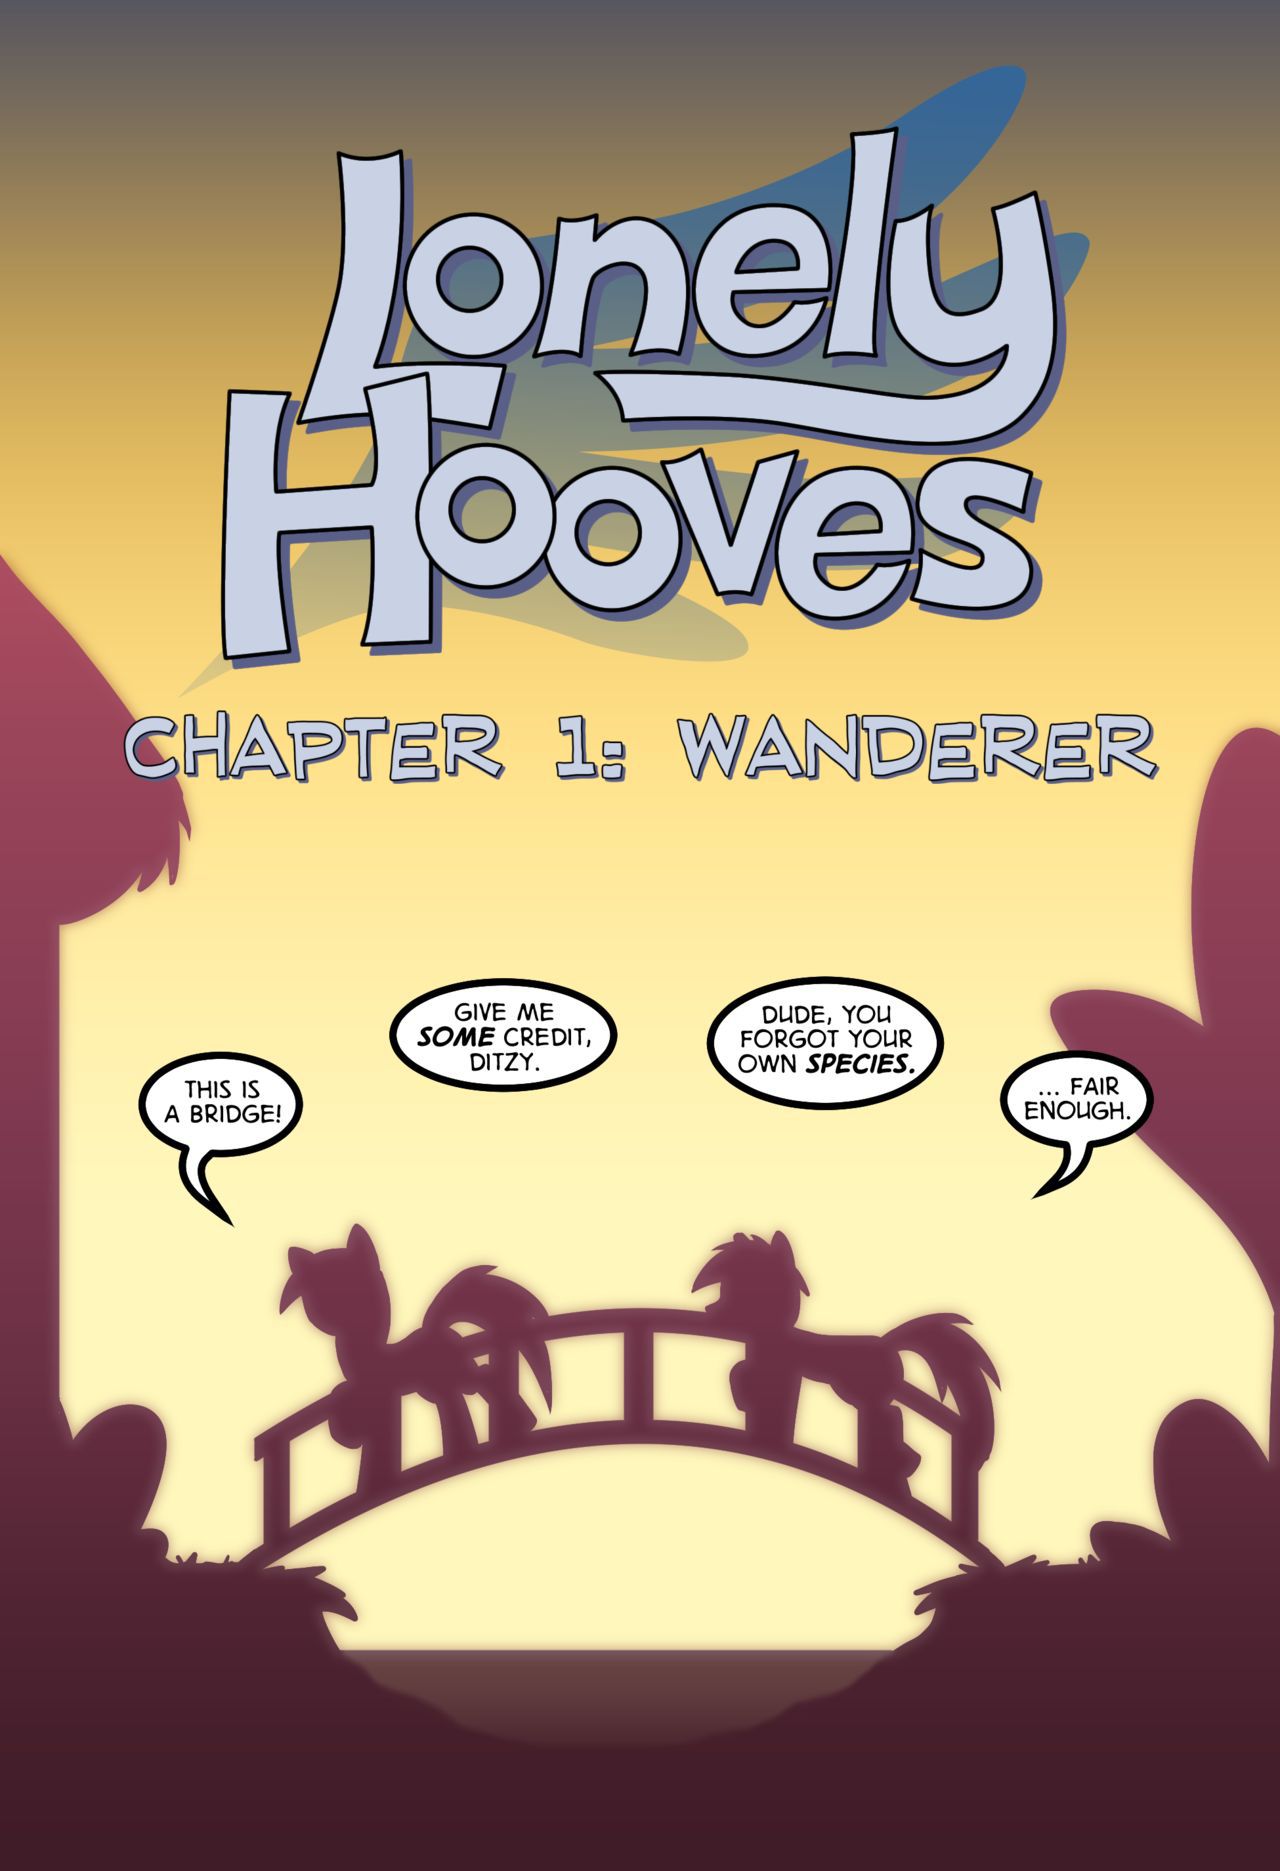 [Zaron] Lonely Hooves (My Little Pony Friendship Is Magic) [Ongoing] 12